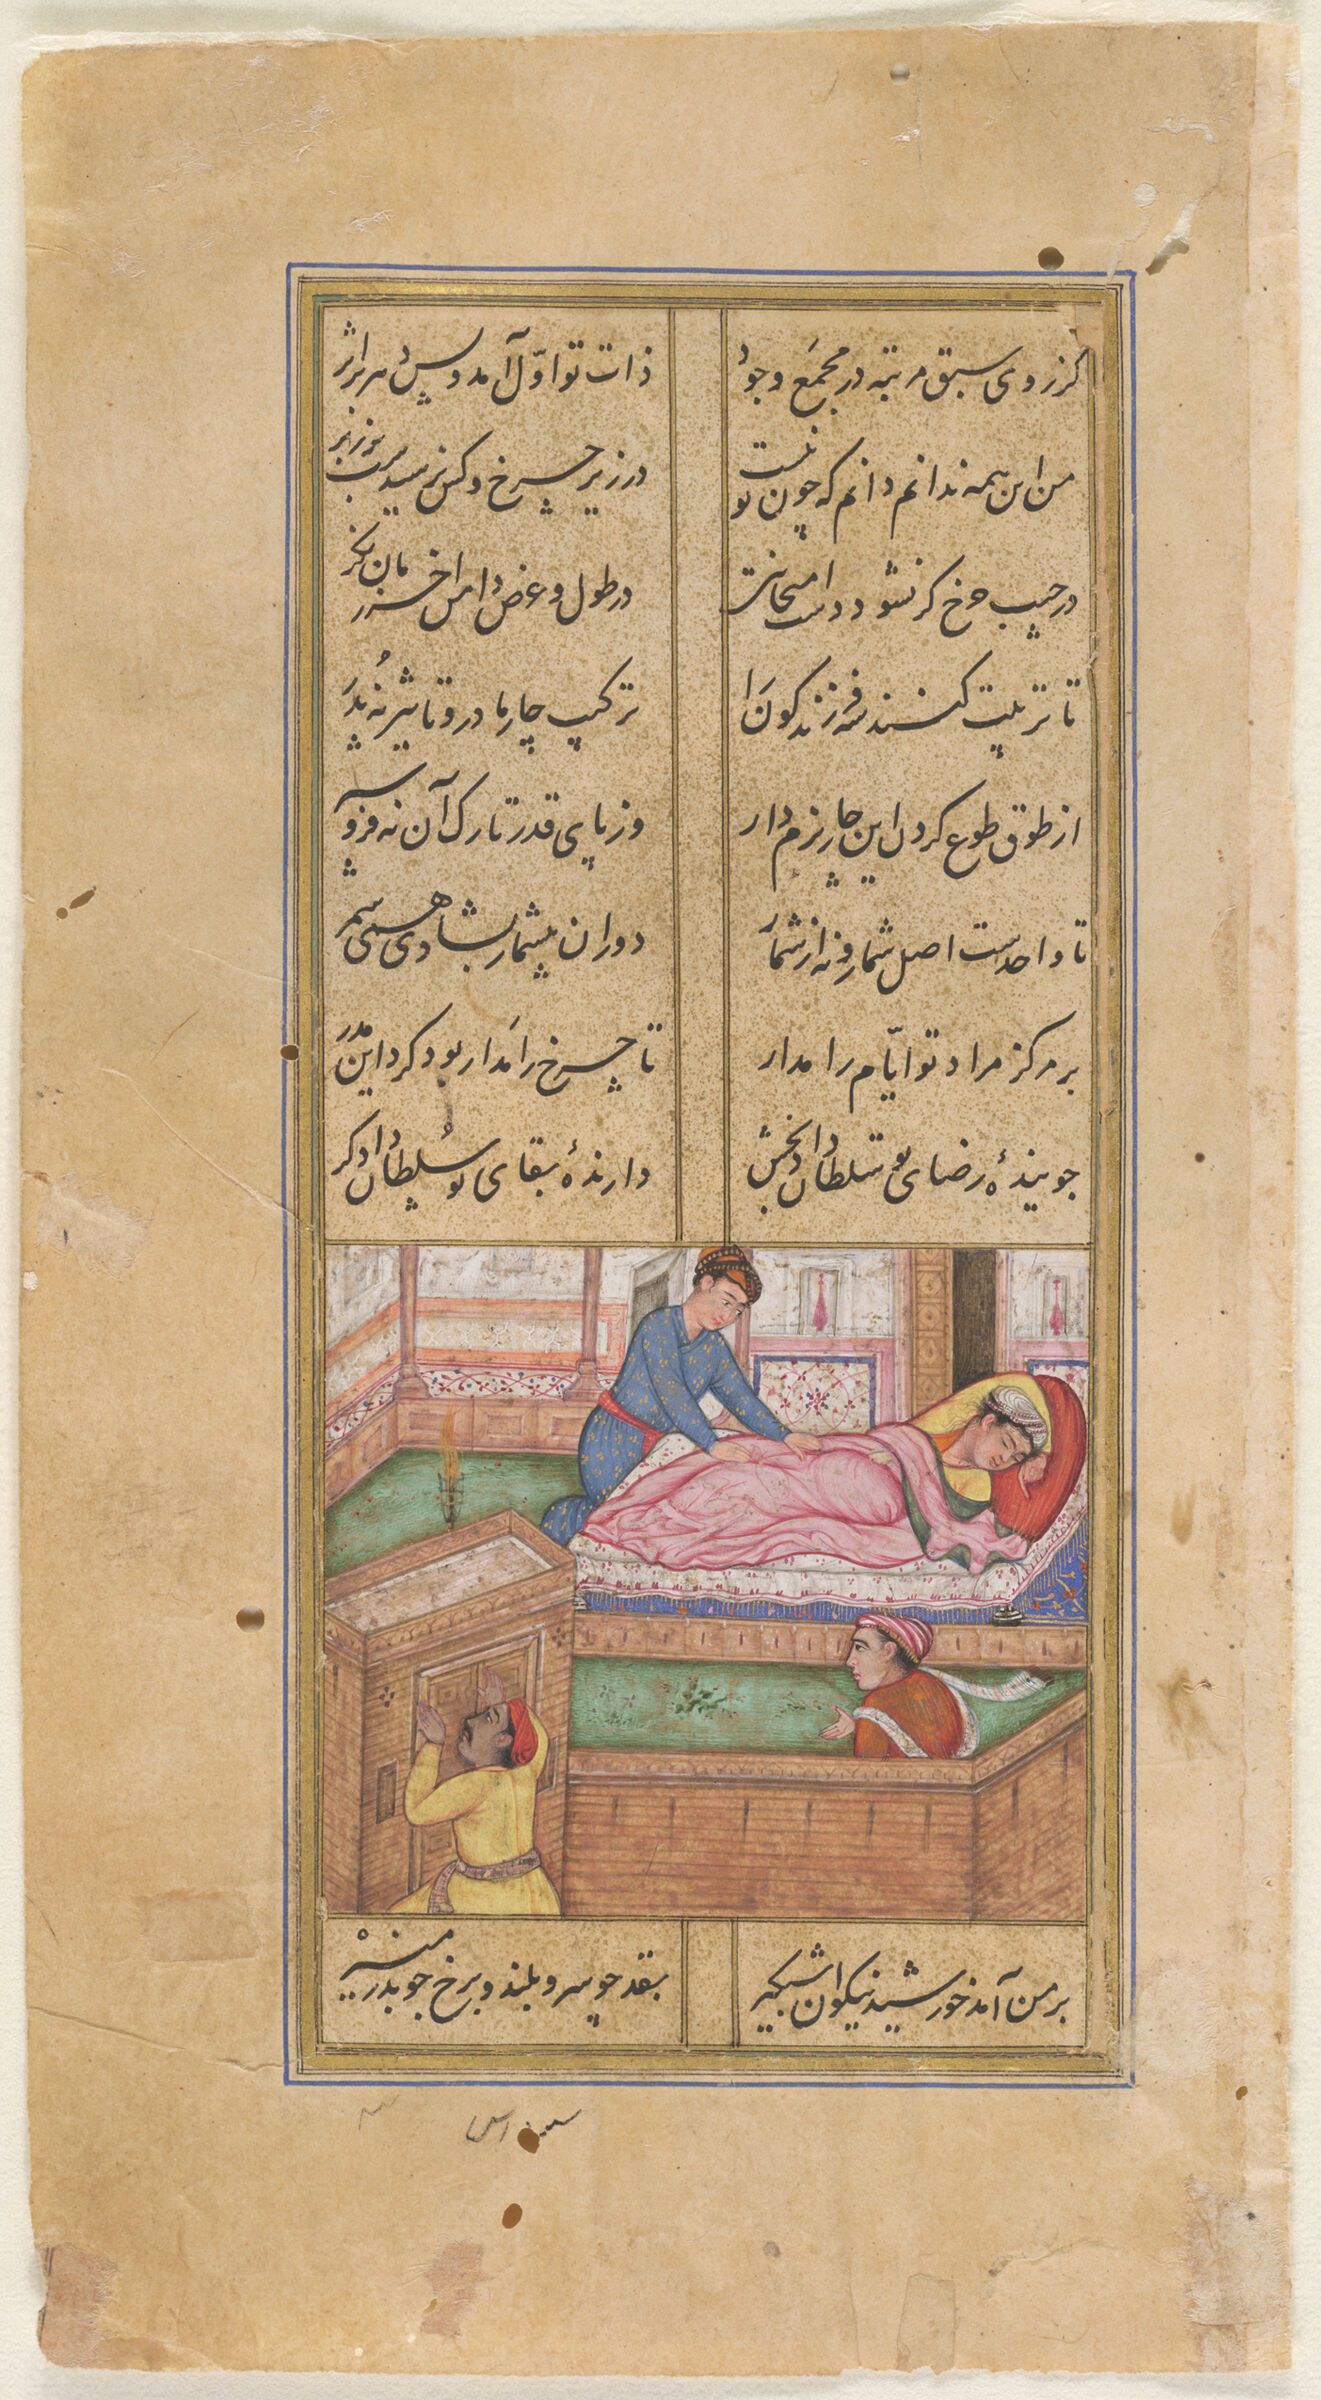 The Beloved Arrives At Midnight (Painting, Recto; Text, Verso), Folio 54 From A Manuscript Of The Divan (Collection Of Works) Of Anvari